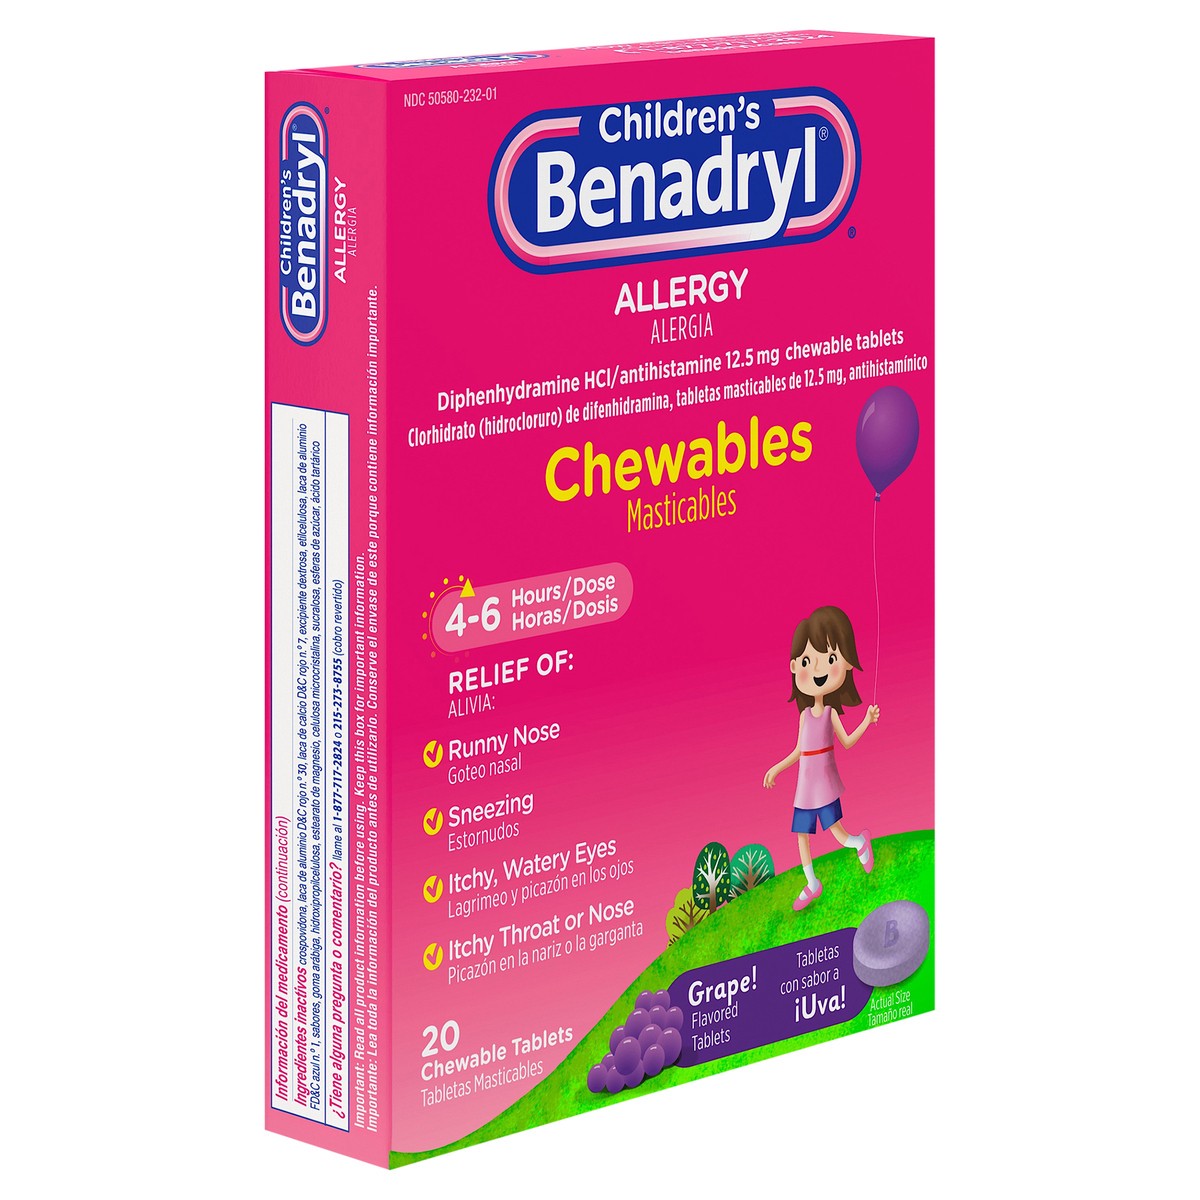 slide 2 of 7, Benadryl Allergy Chewables with Diphenhydramine HCl, Antihistamine Chewable Tablets For Relief of Allergy Symptoms Like Sneezing, Itchy Eyes, & More, Grape Flavor,, 20 ct